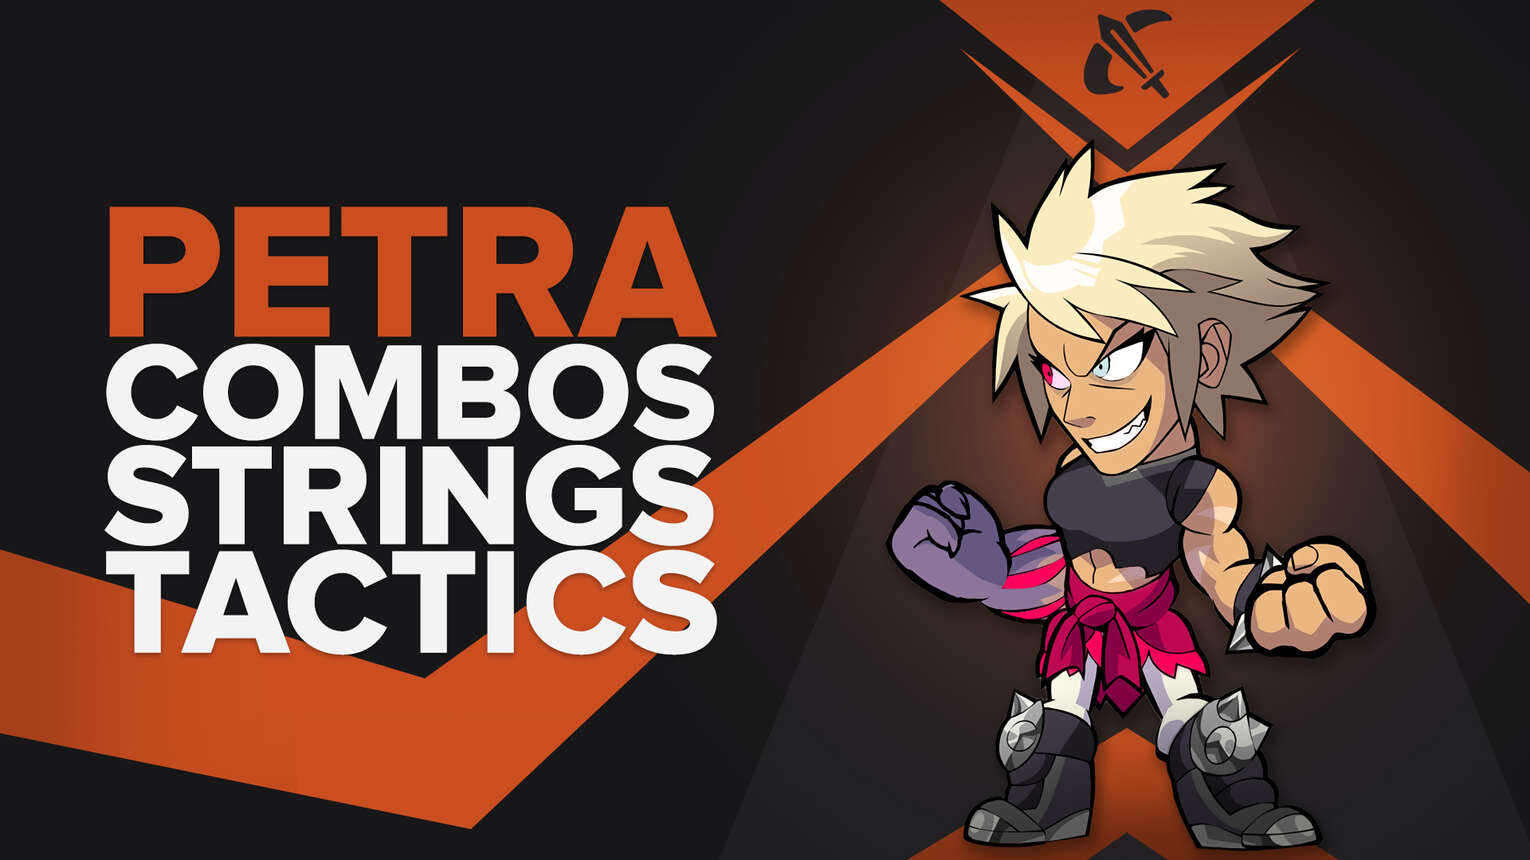 Best Petra combos, strings, and combat tactics in Brawlhalla